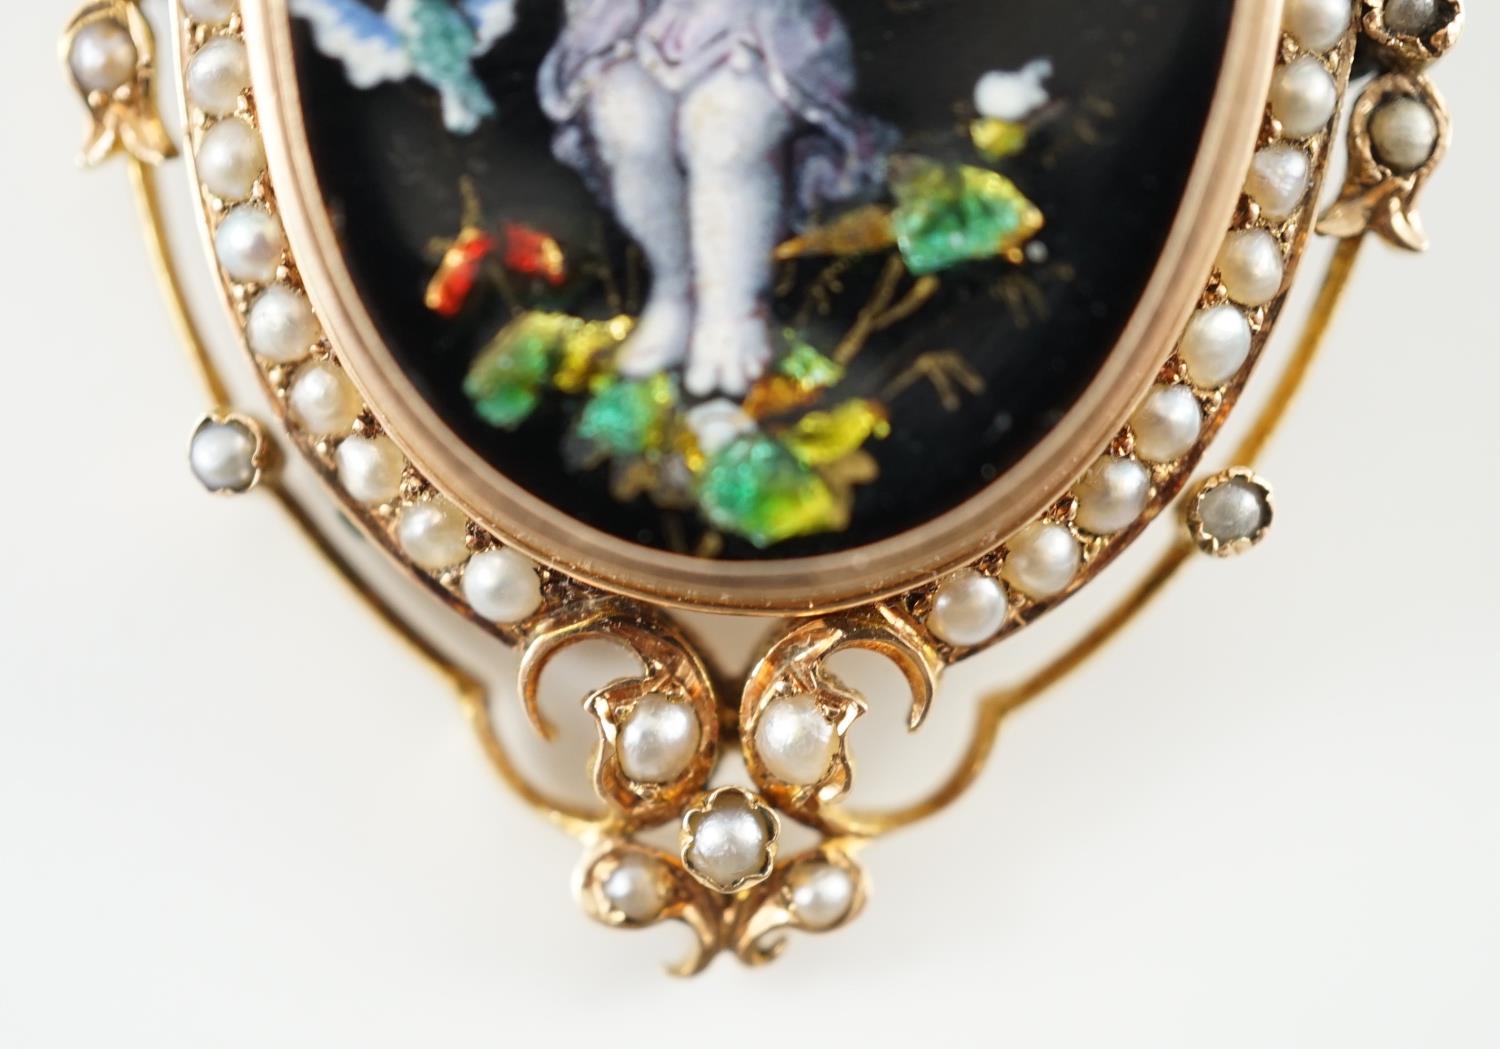 A Victorian oval gold and enamel pendant/brooch, painted with a cherub offering cherries to a - Image 3 of 4